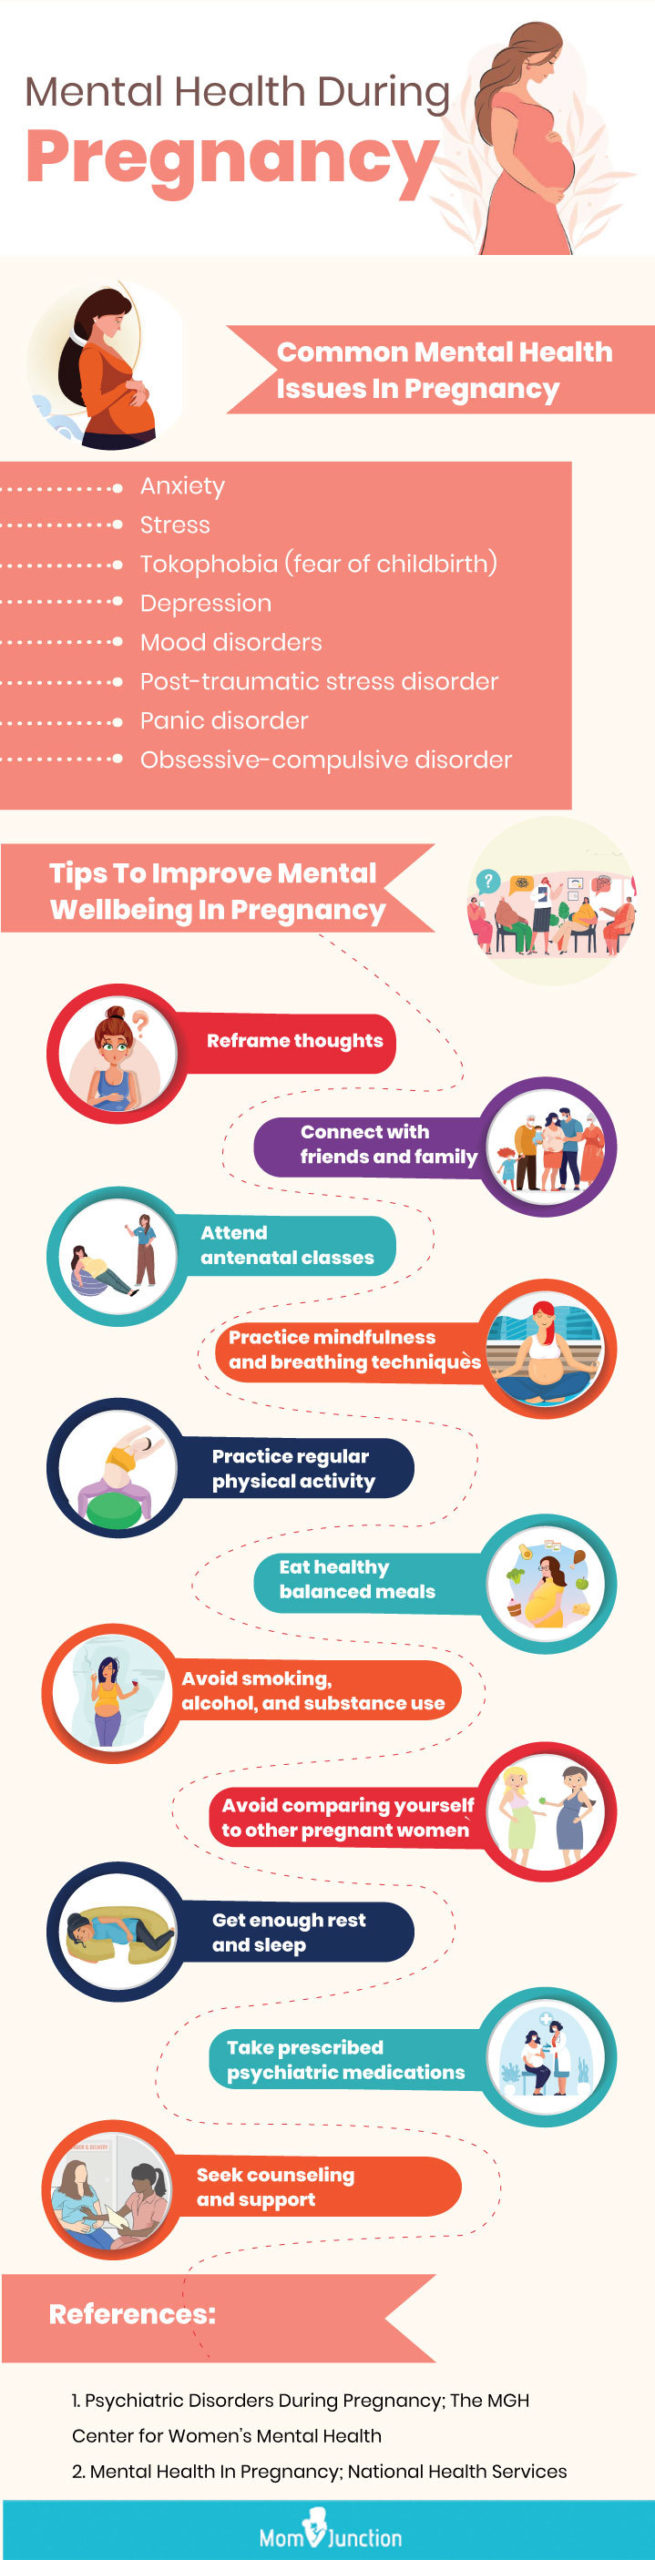 mental health during pregnancy (infographic)